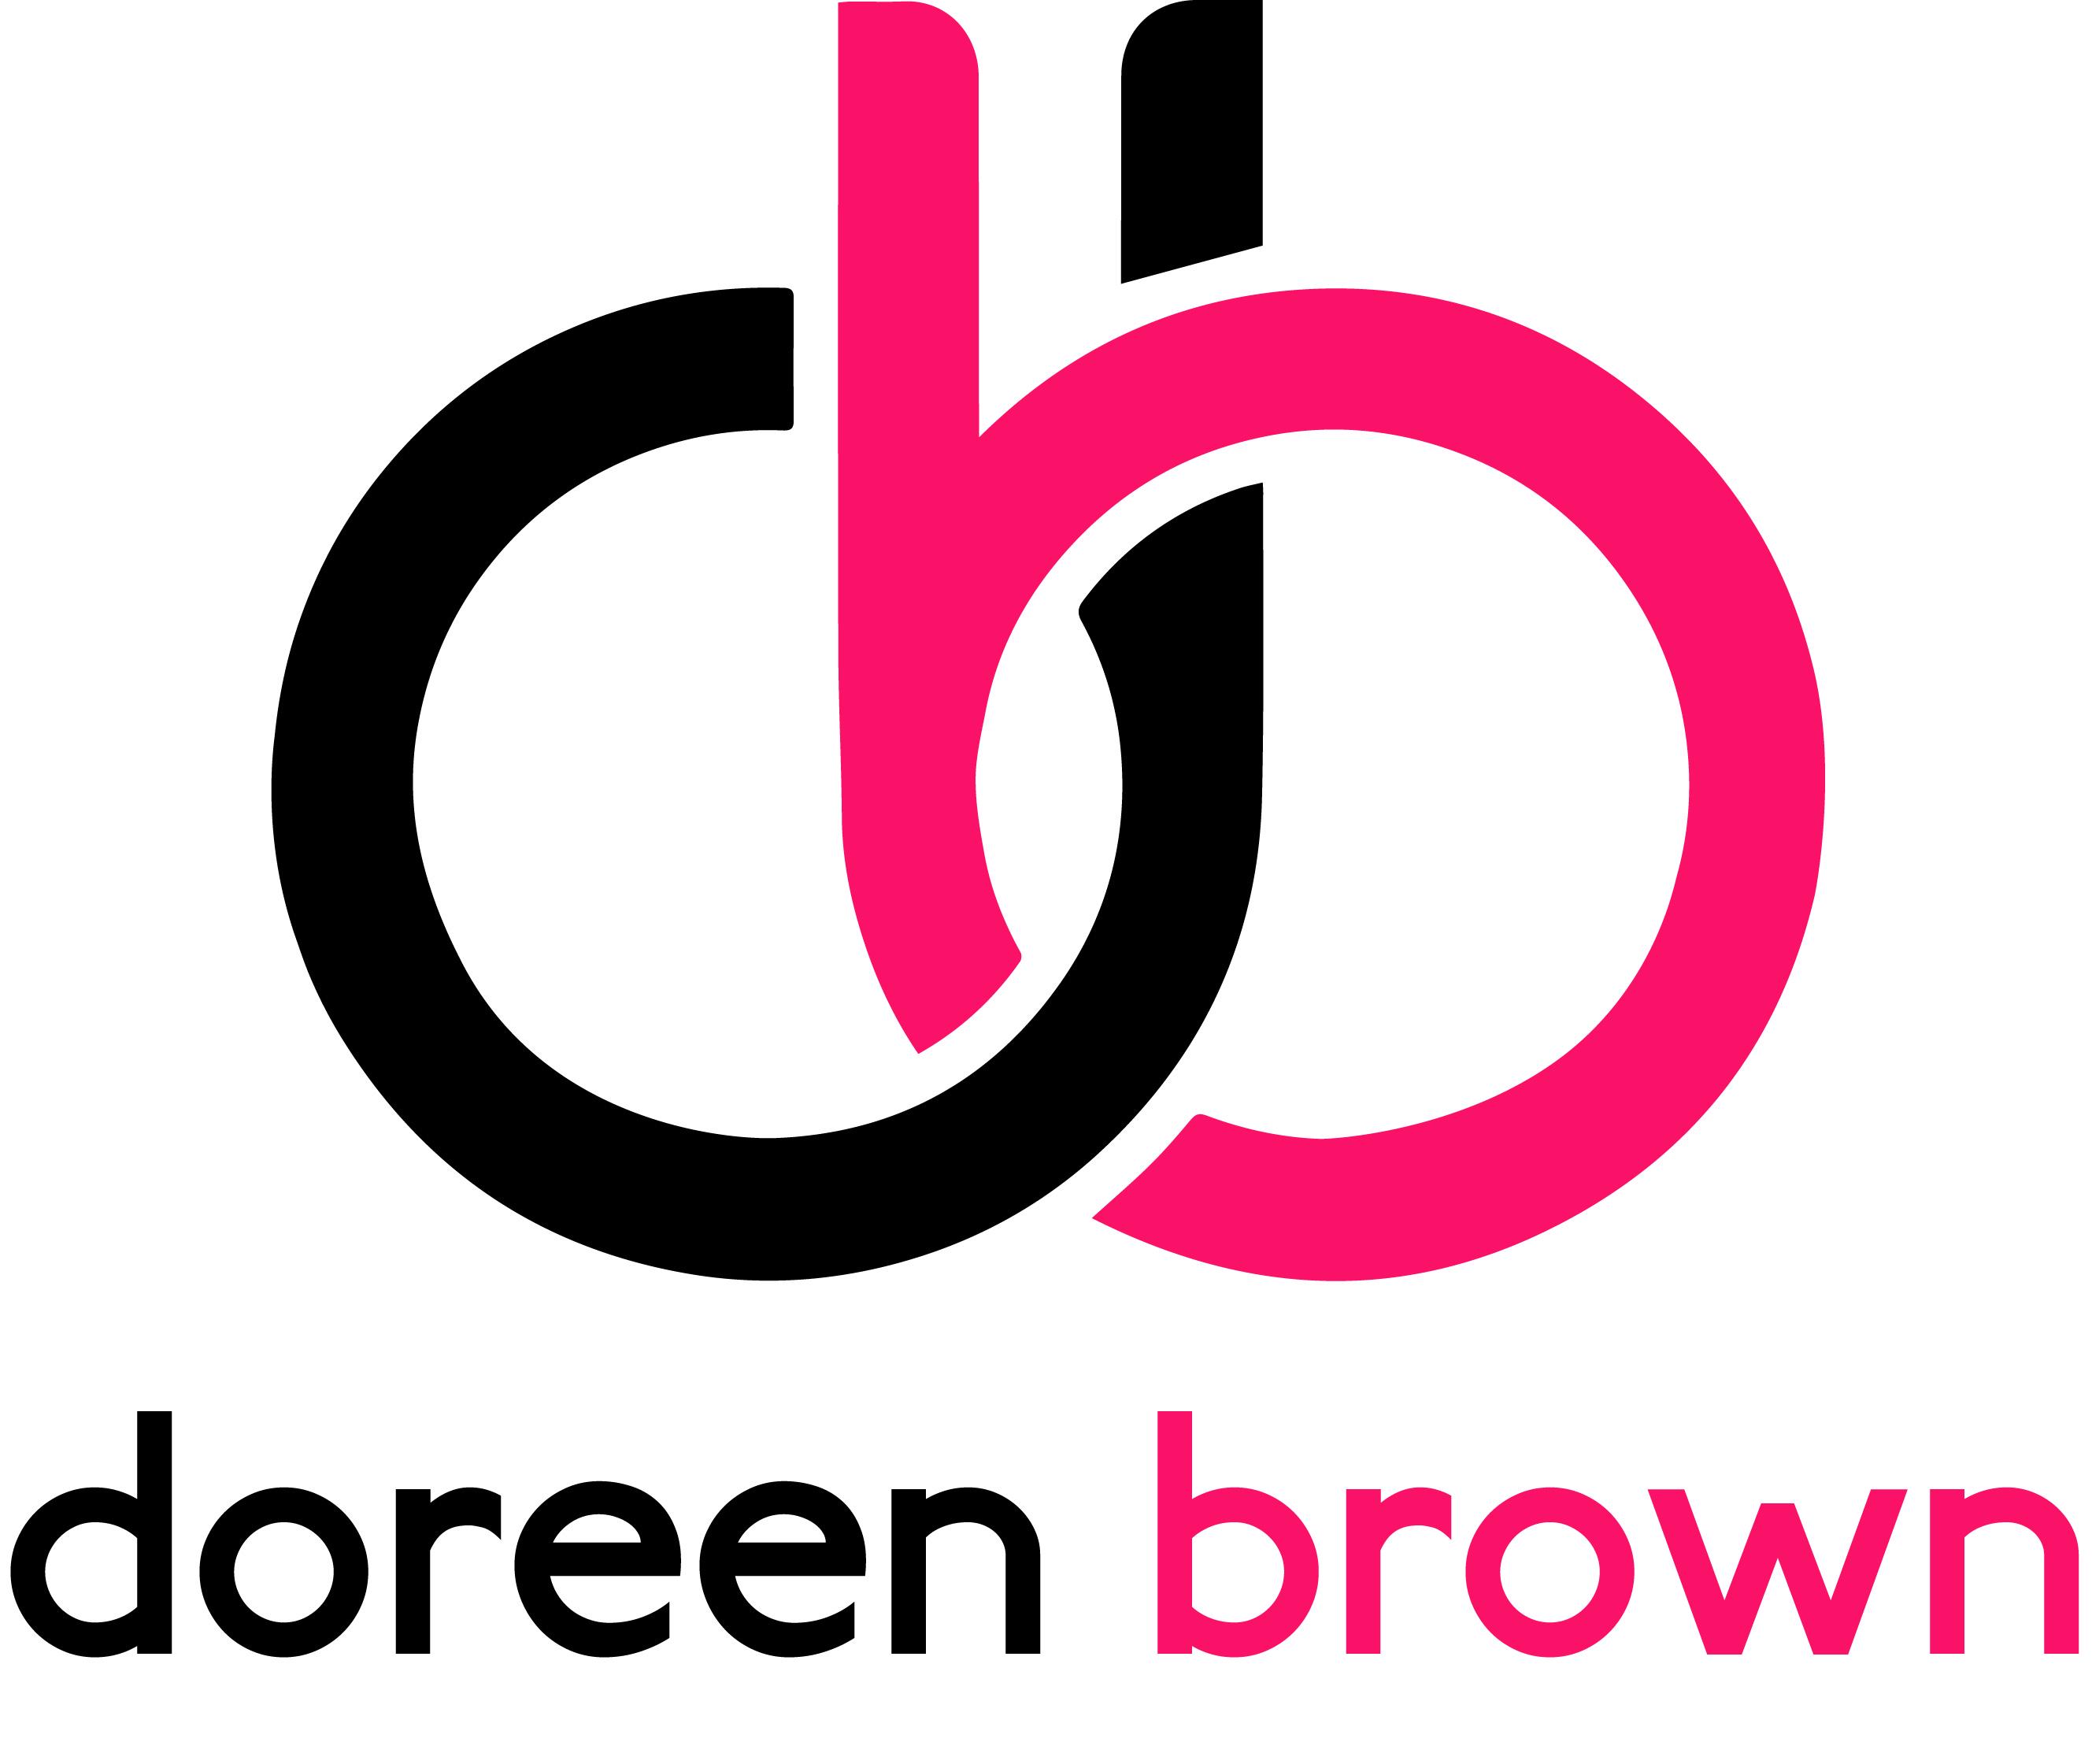 Doreen Brown - SEO Consulting Wollongong profile on Qualified.One